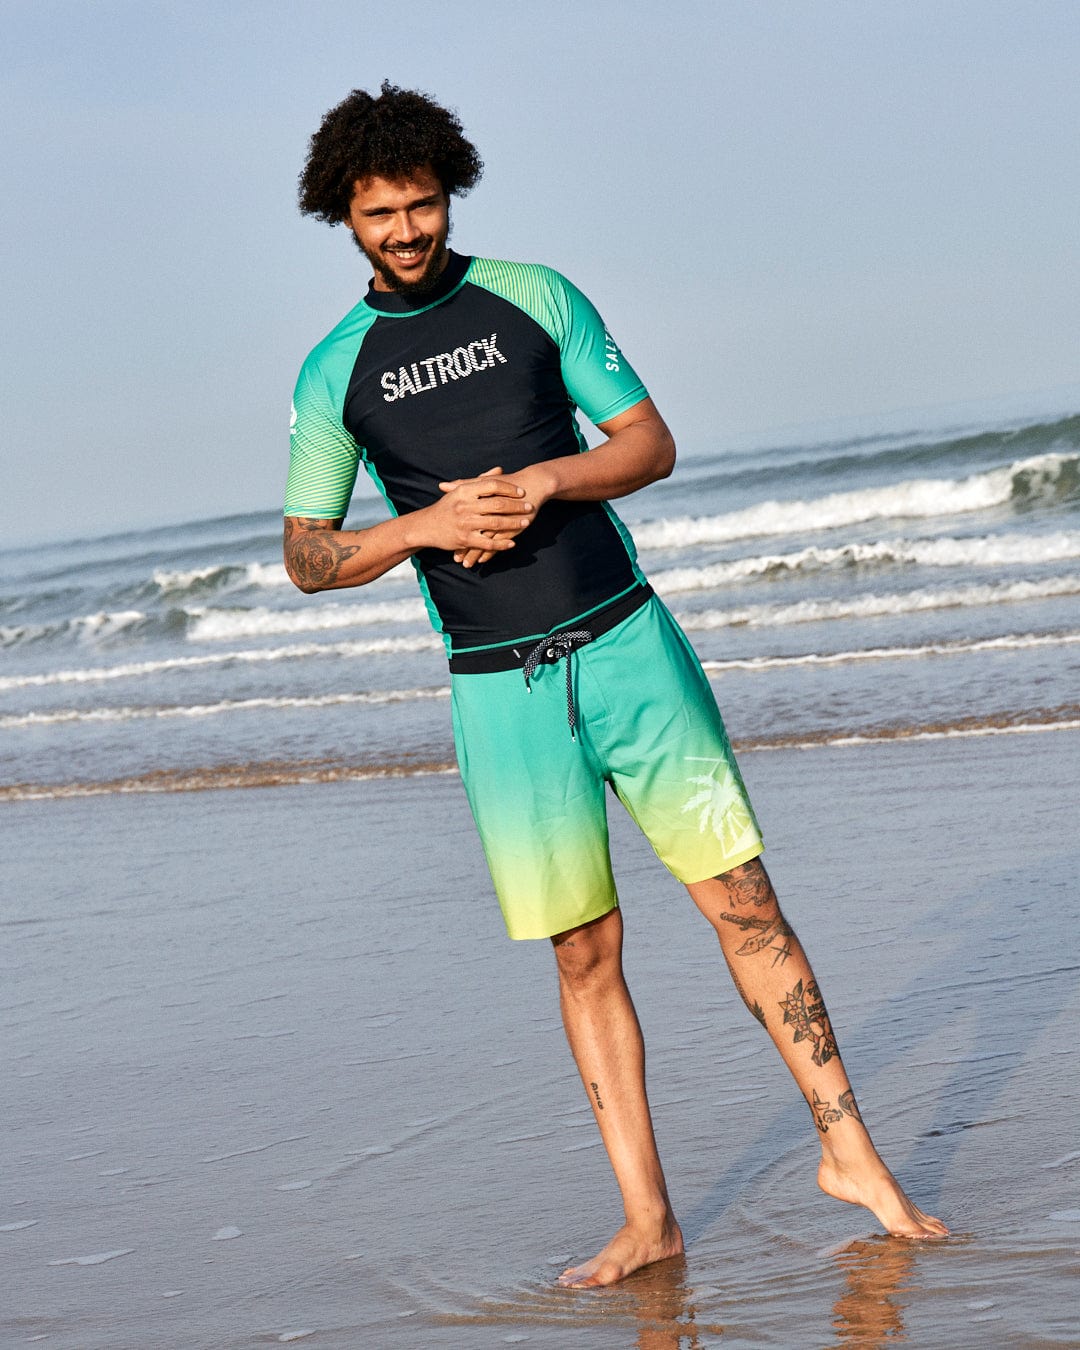 A man with curly hair stands on a beach, wearing a Saltrock DNA Wave Recycled Mens Short Sleeve Rashvest in Black/Green, and shorts, smiling towards the camera.